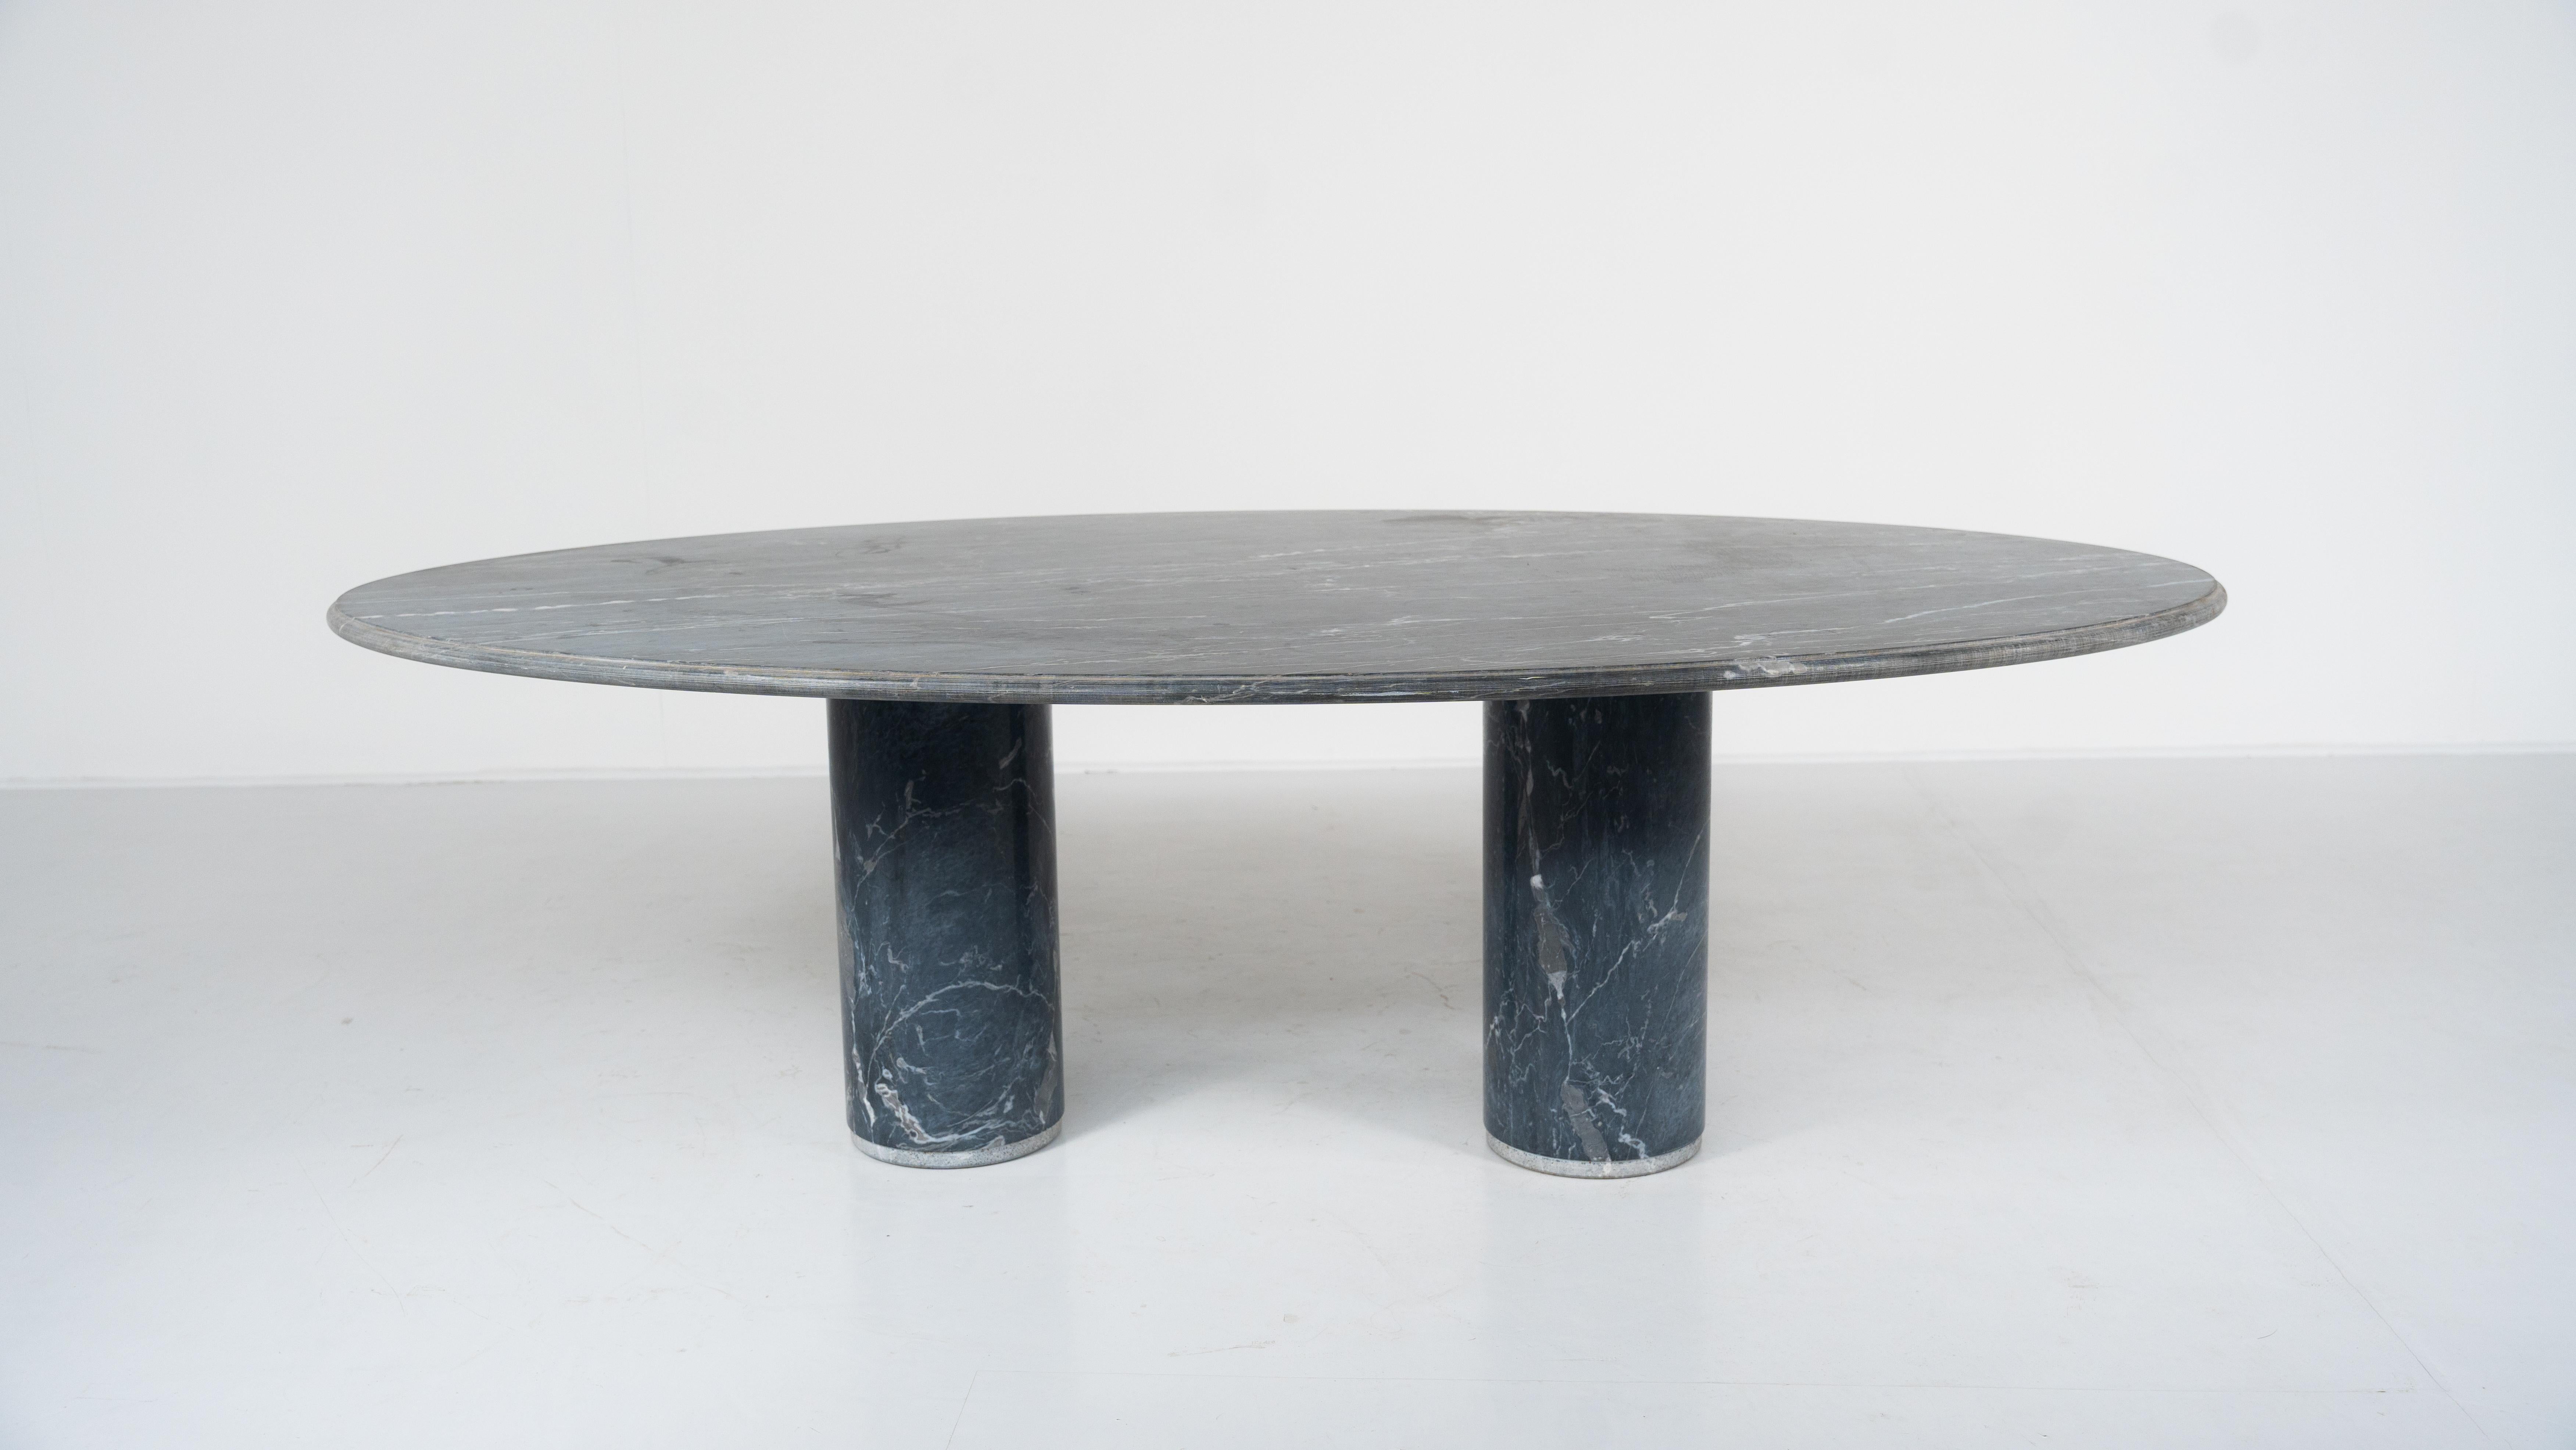 Mid-Century Modern Ovale del Giardiniere Table by Achille Castiglioni for Upgroup, Marble, 1980s For Sale